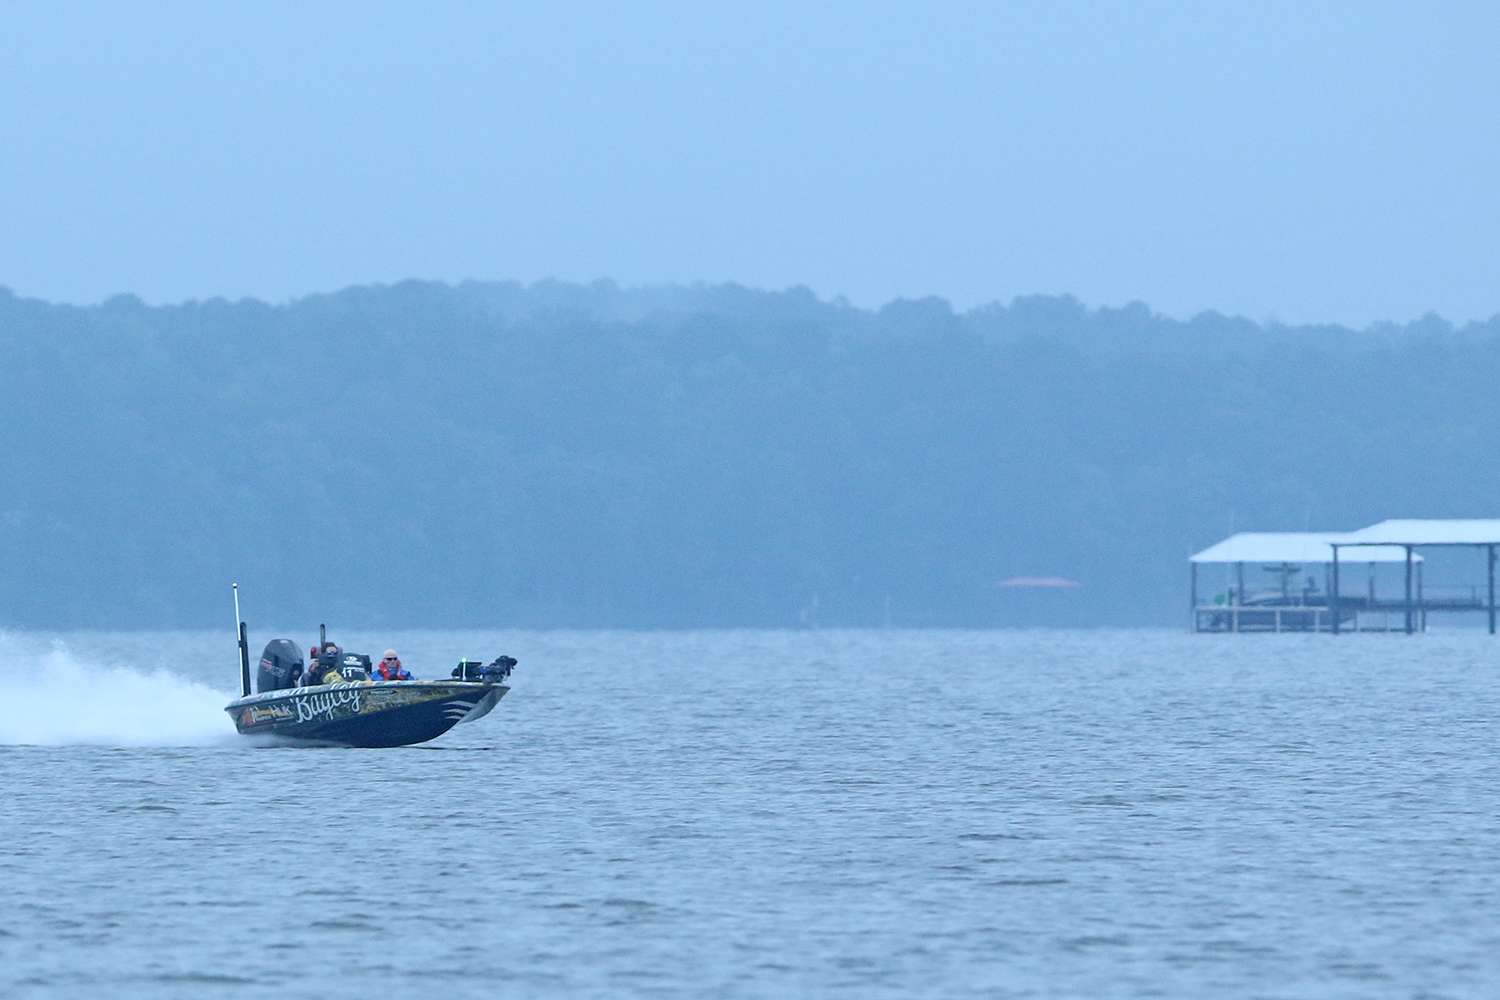 Follow Georgia pro Drew Benton as he puts the first five bass in his Phoenix Boats livewell during Day 1 of the 2020 DeWalt Bassmaster Elite at Lake Eufaula. 